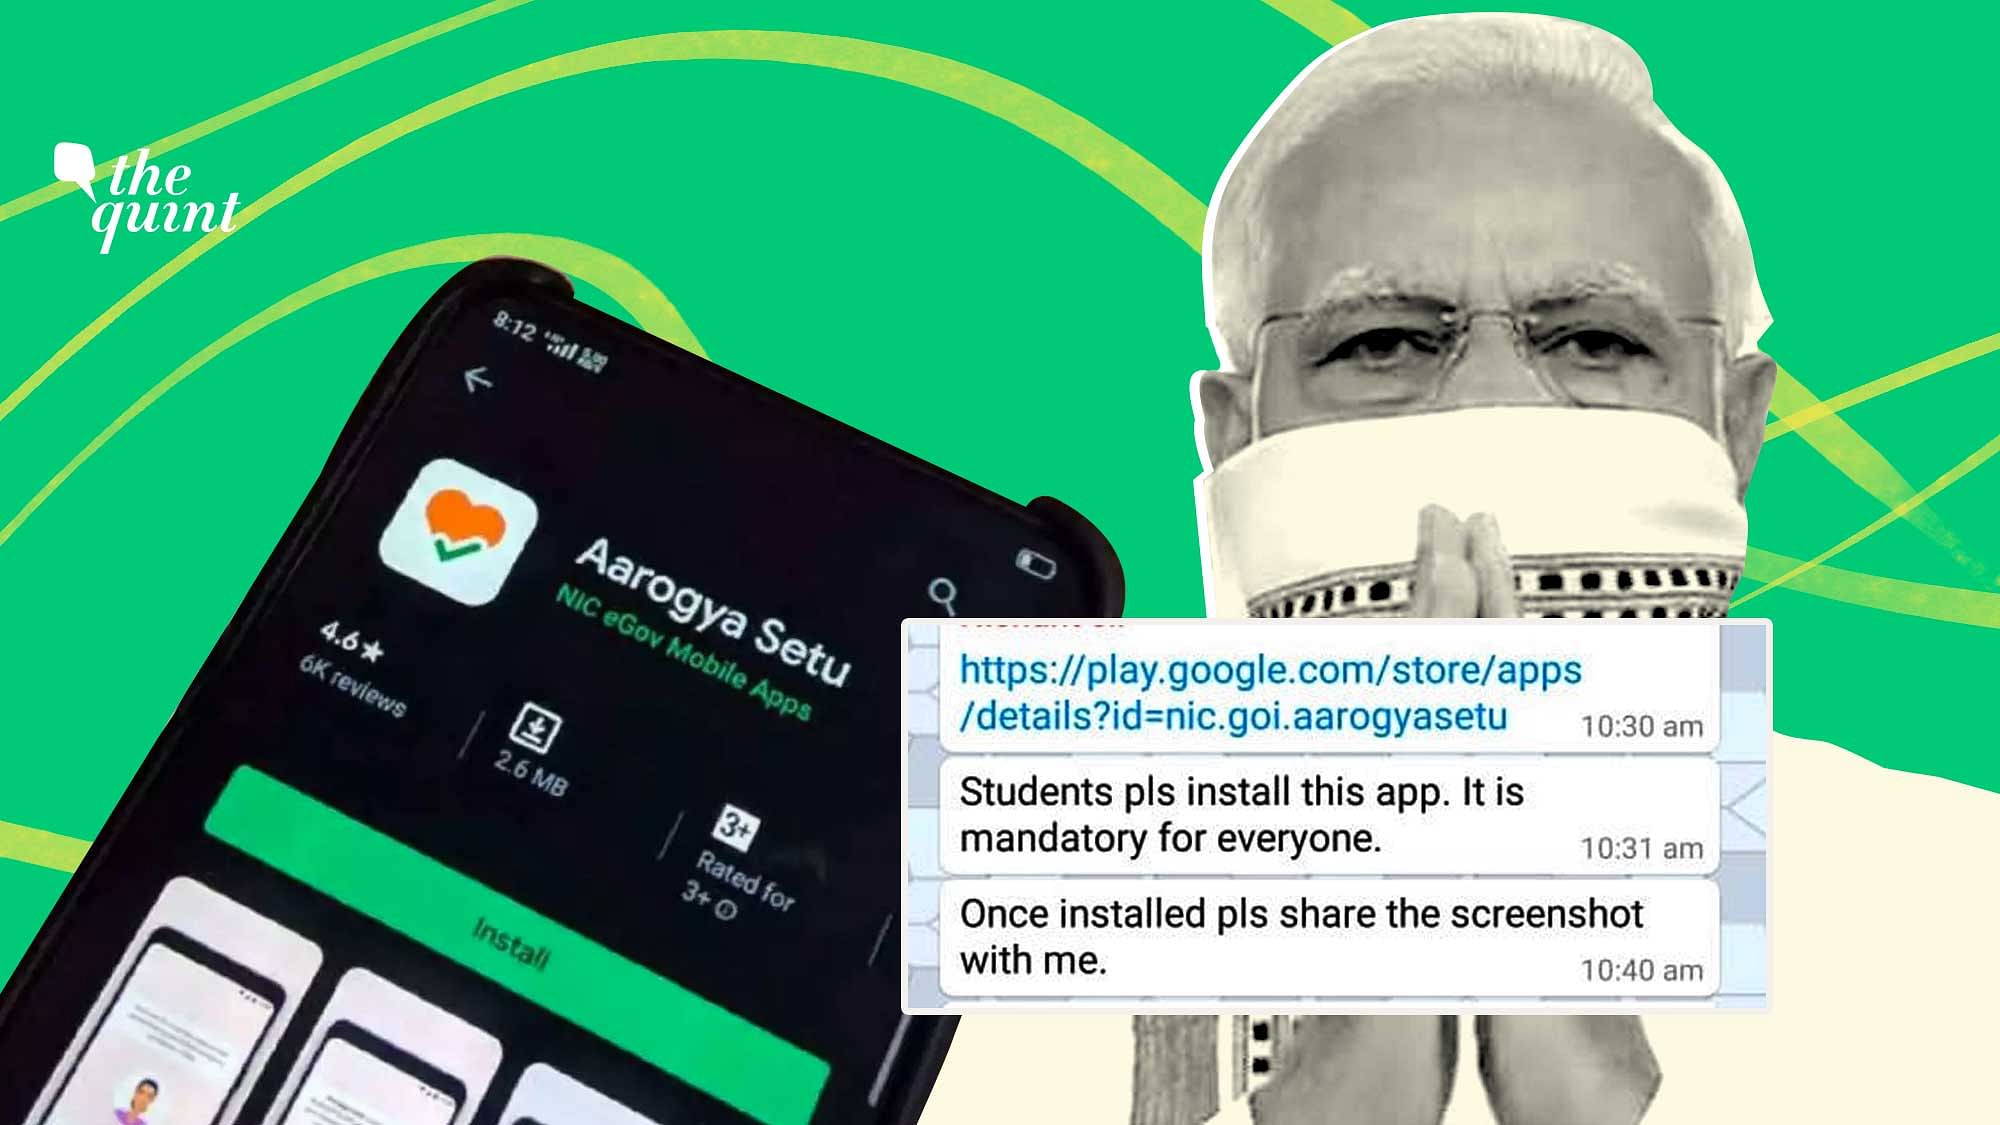 PM Modi’s speech and the MHA’s order only encourage people to download the app, they do not make it mandatory to do so.